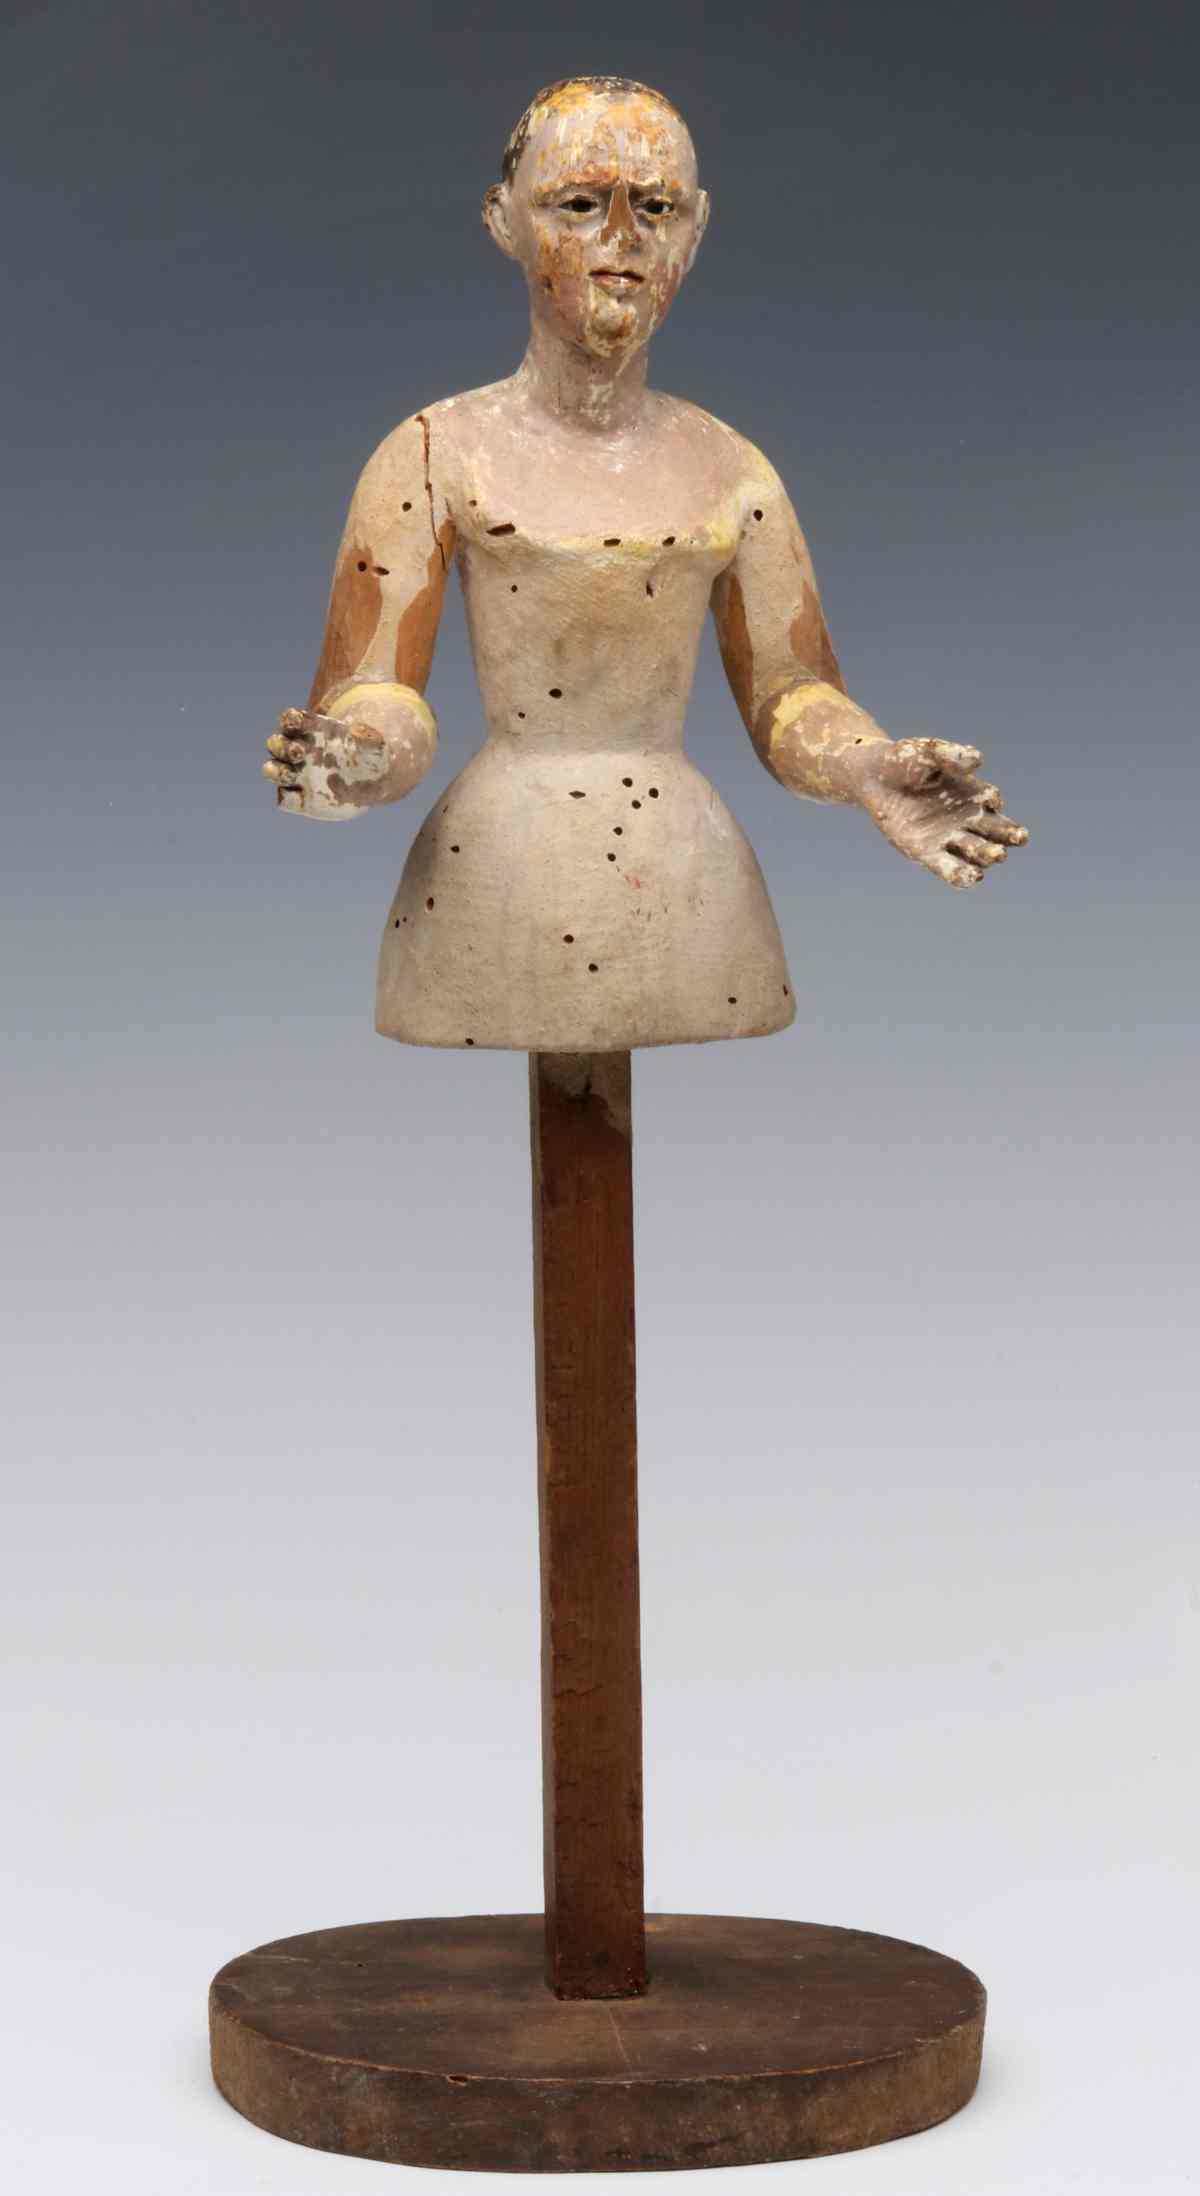 AN 18TH CENTURY FRENCH DRESS MAKER'S DOLL